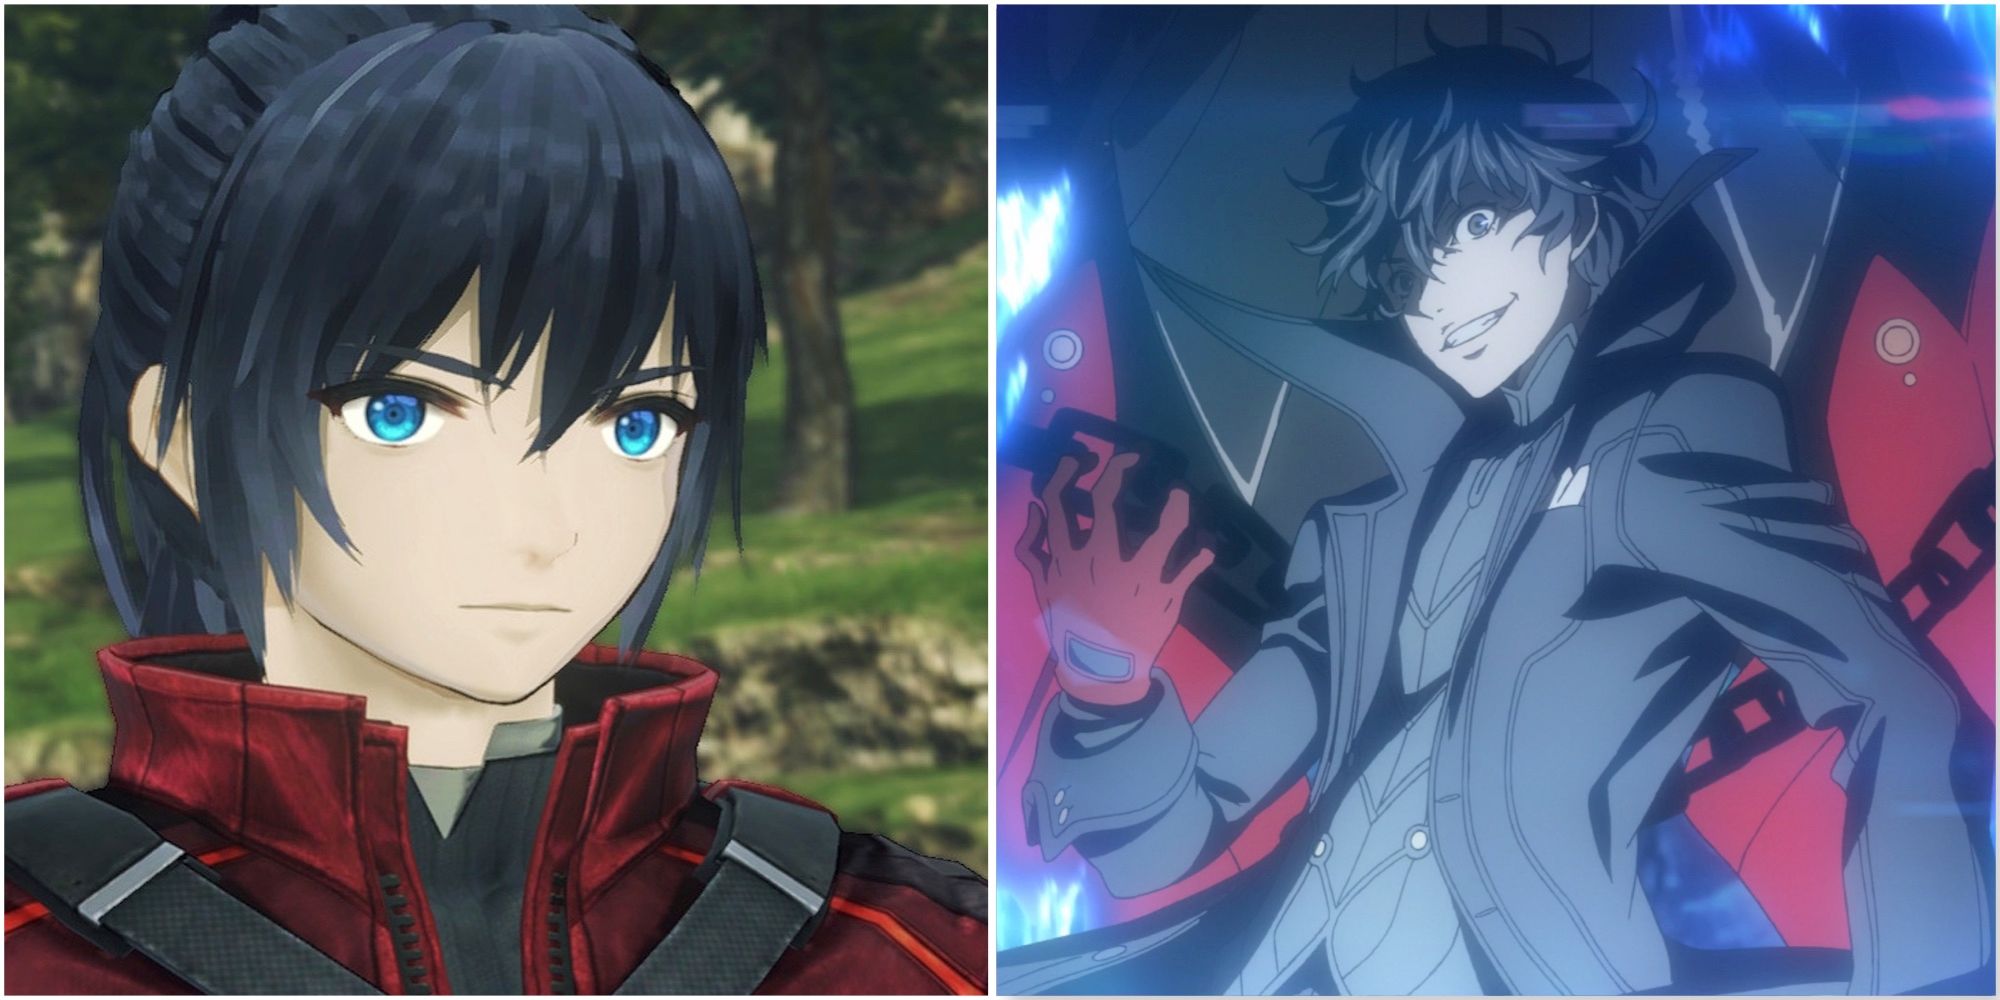 Noah in Xenoblade Chronicles 3 and Joker in Persona 5